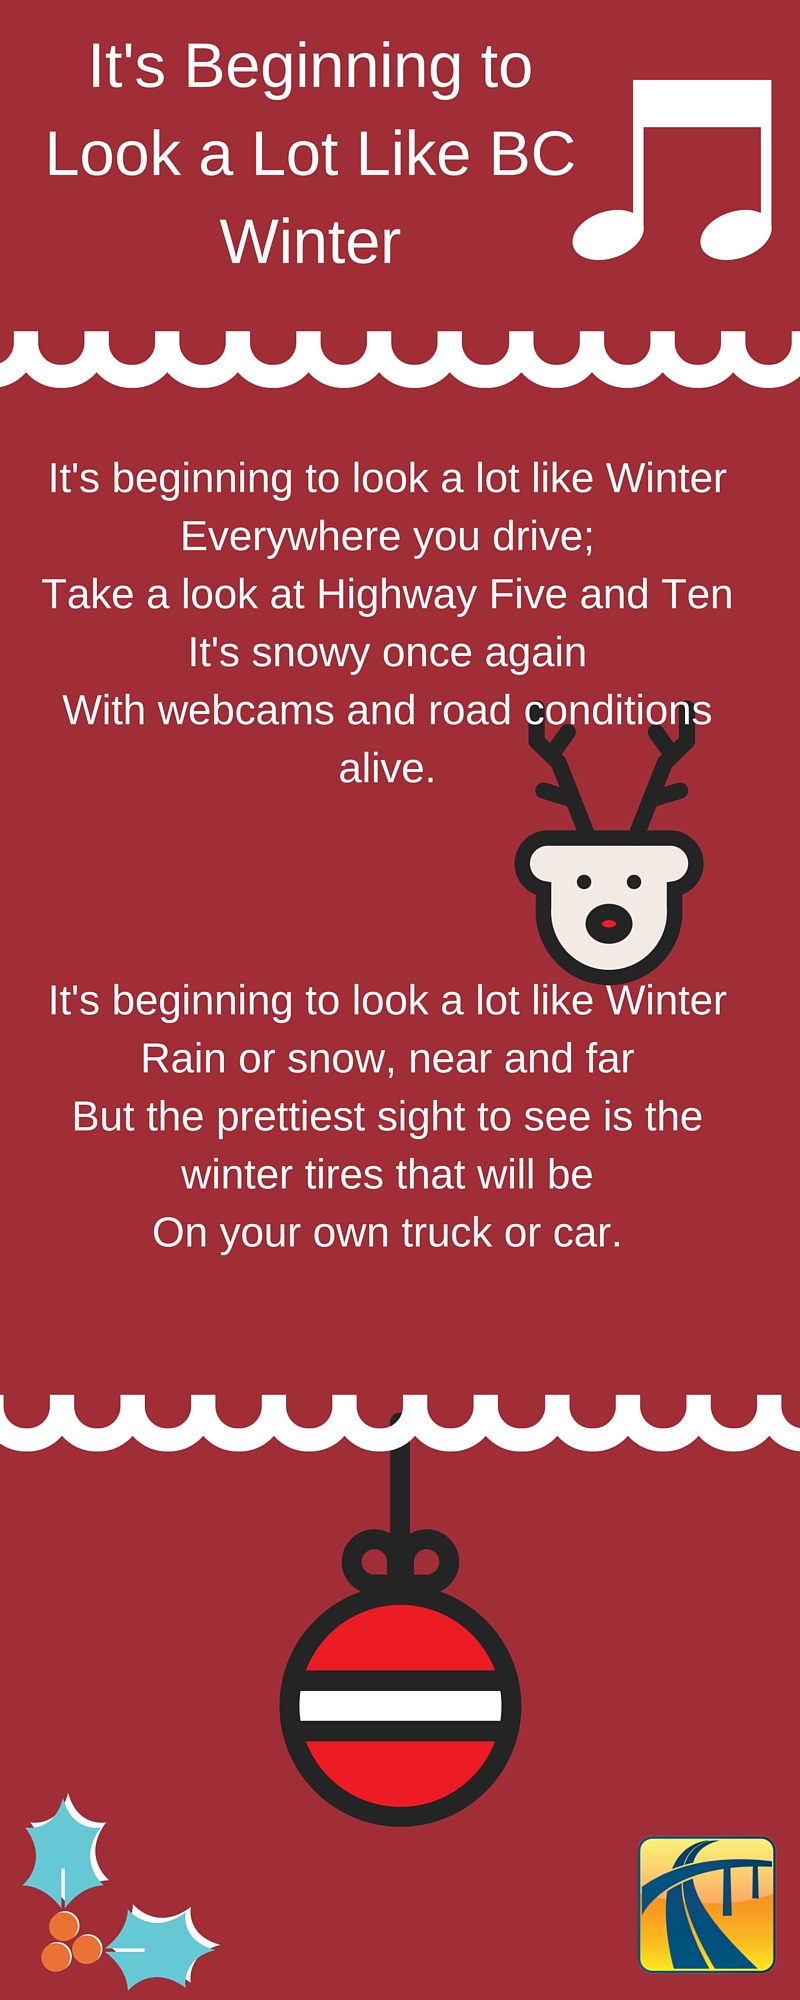 Beginning to Look a Lot like Christmas lyrics promoting highway safety